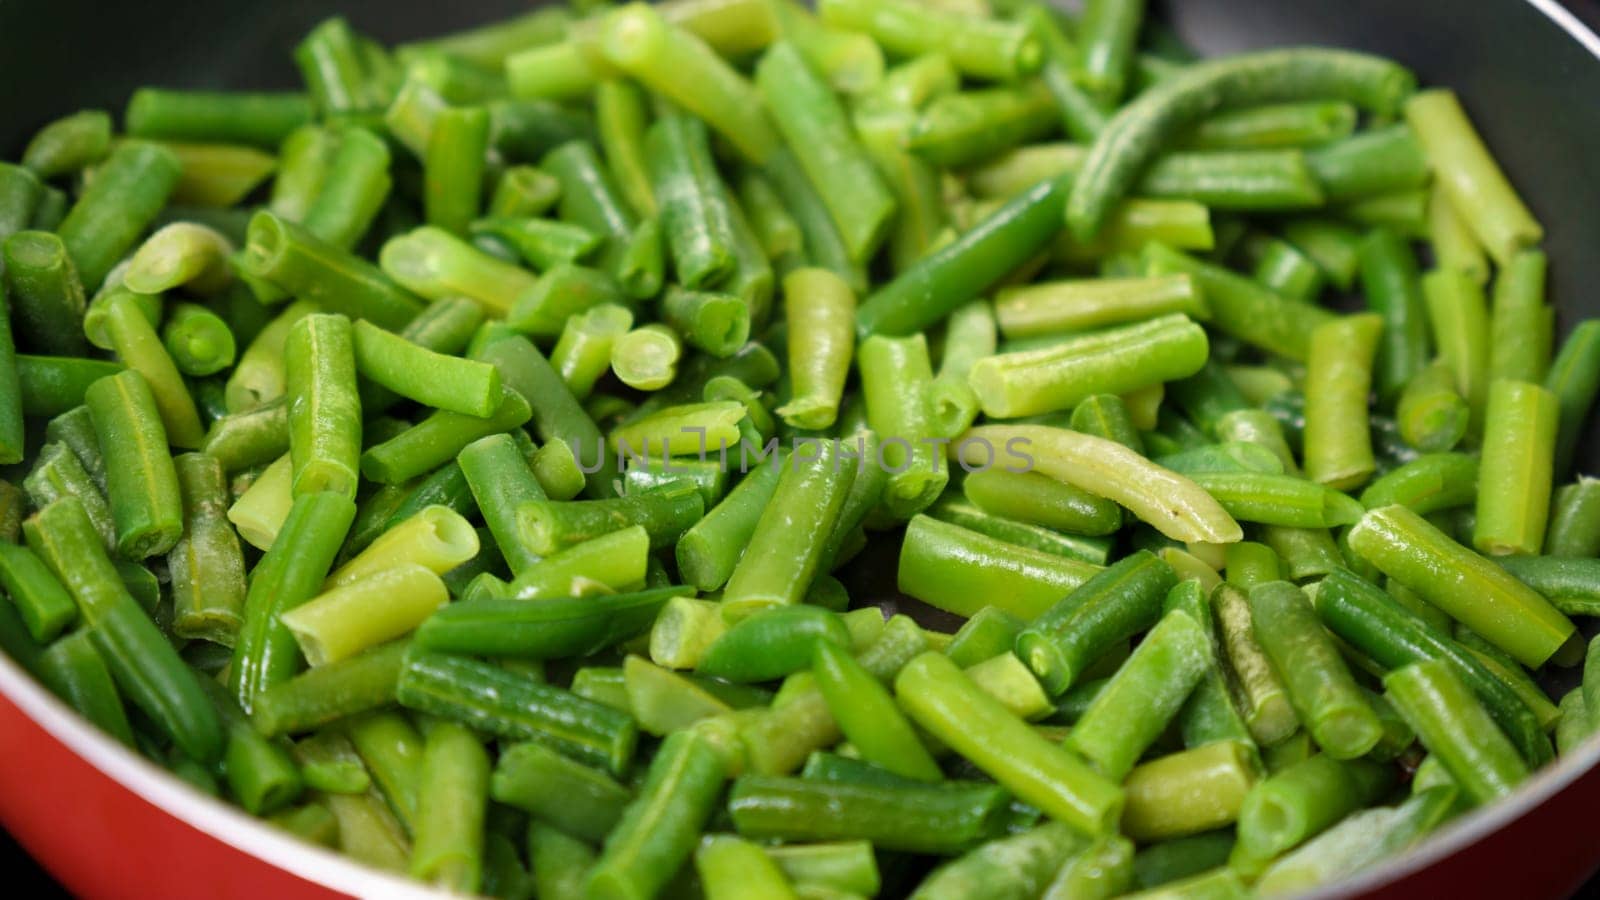 Green beans are being cooked in a pan, close up. Selective focus by darksoul72